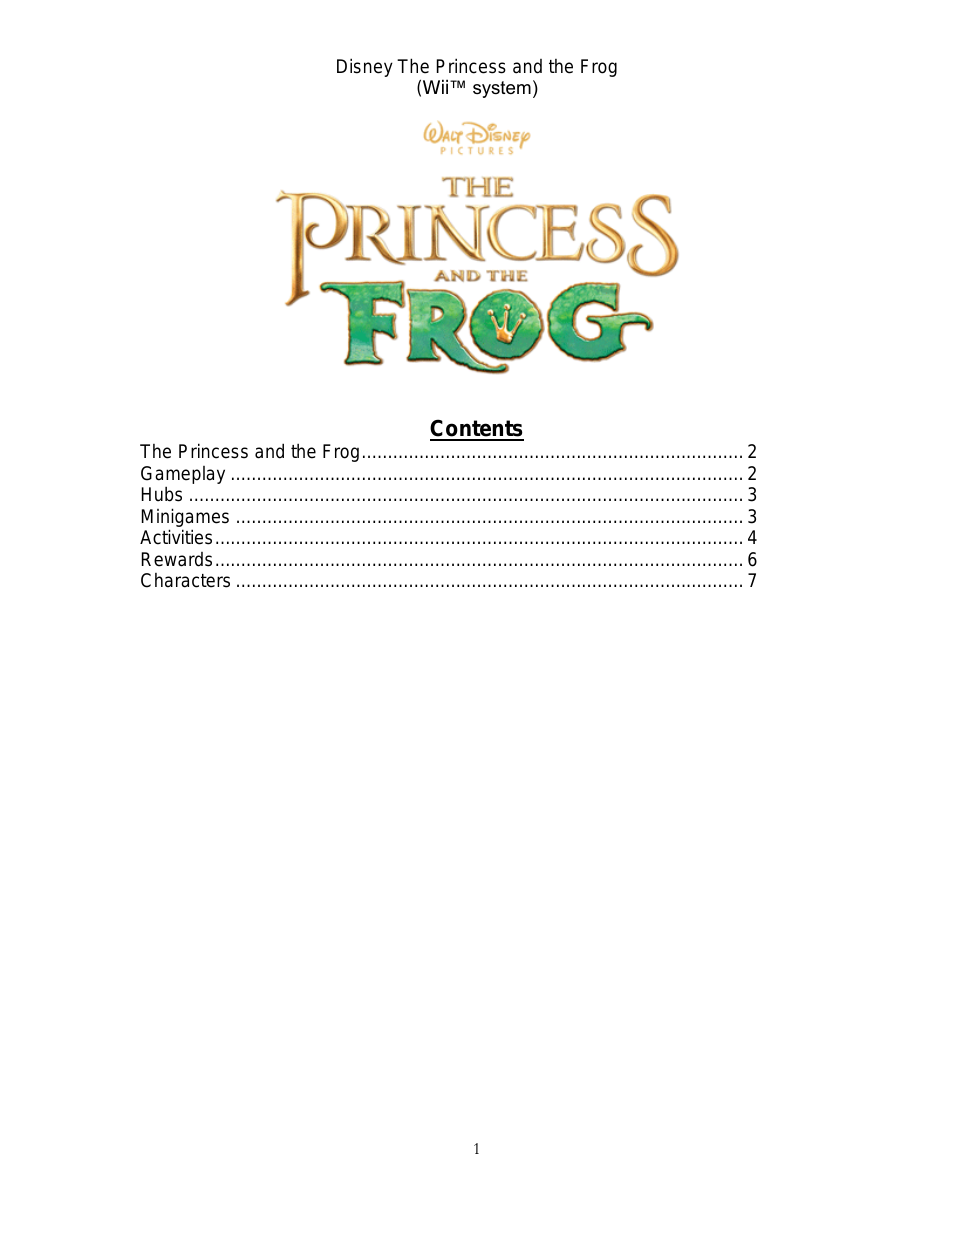 The Princess and the Frog for Wii